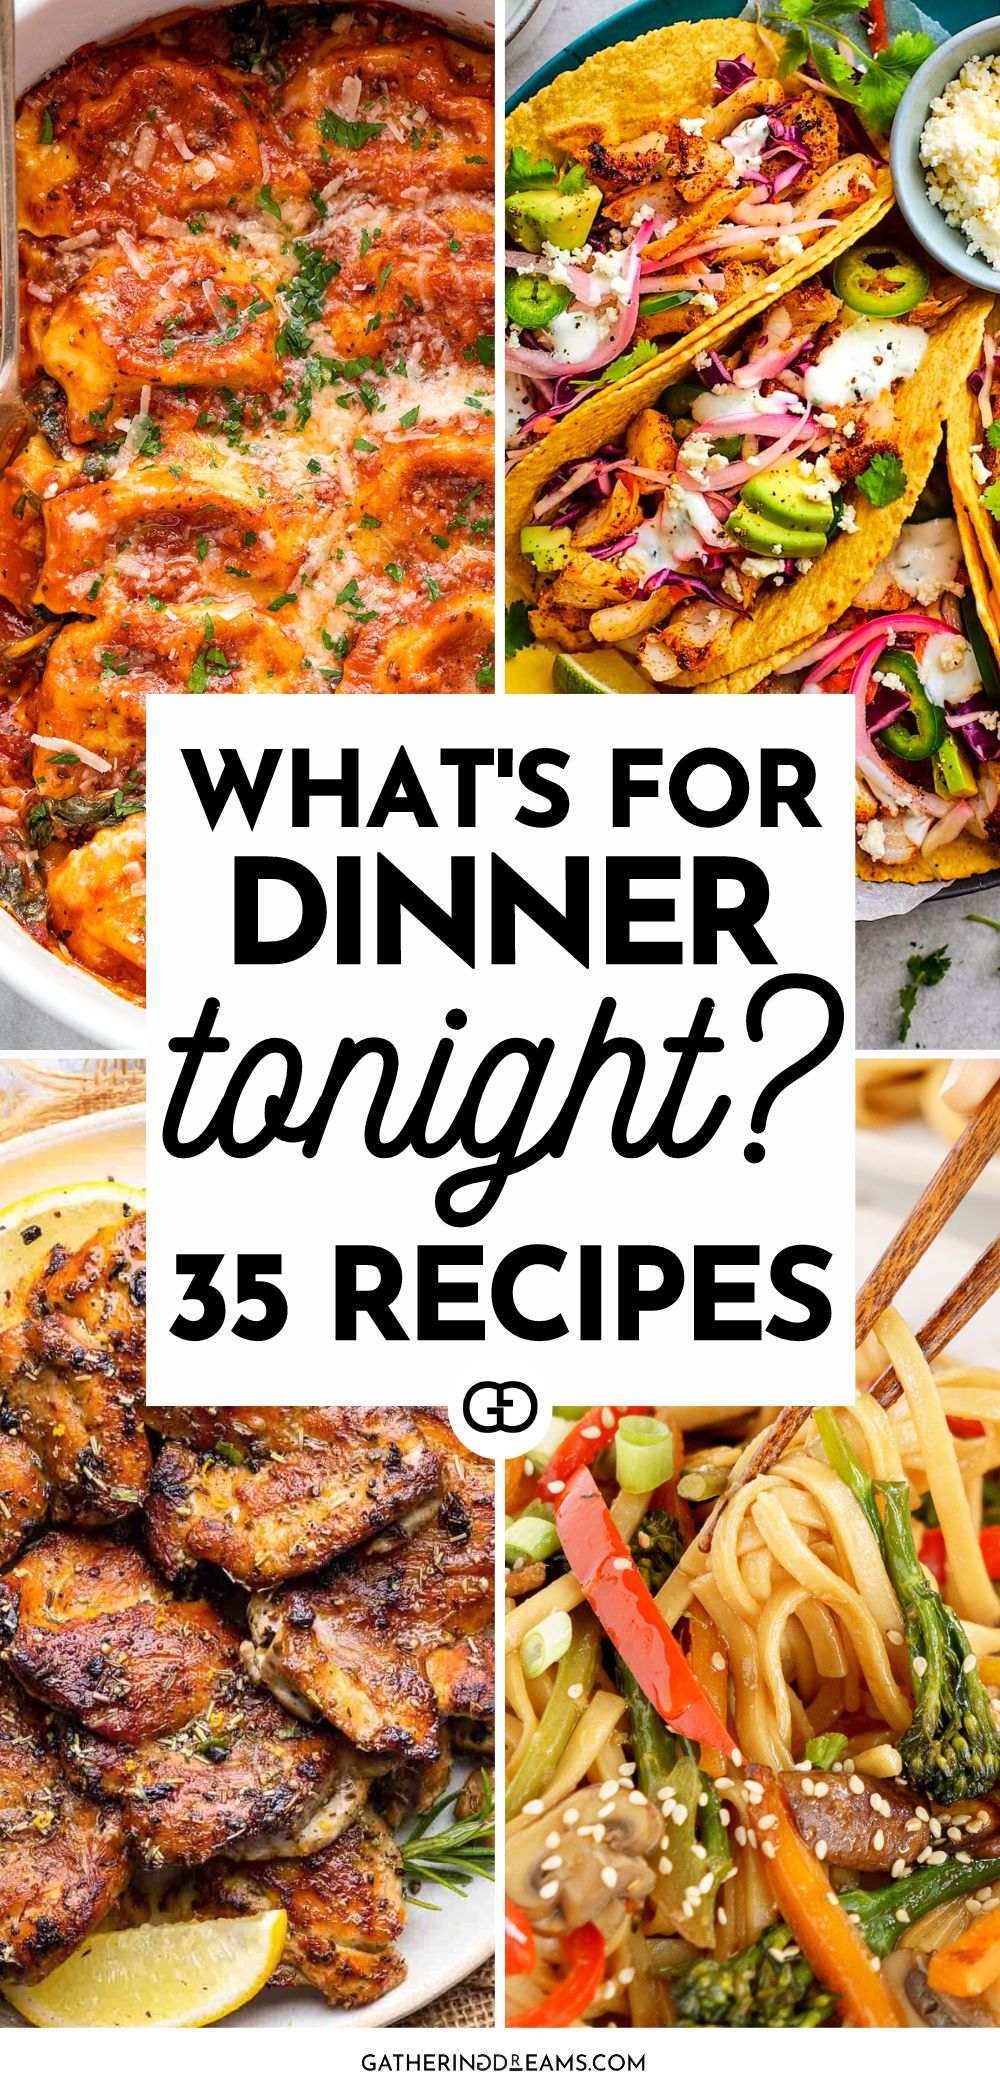 35 Dinner Ideas For Tonight That Are No-Fuss, Big Flavor